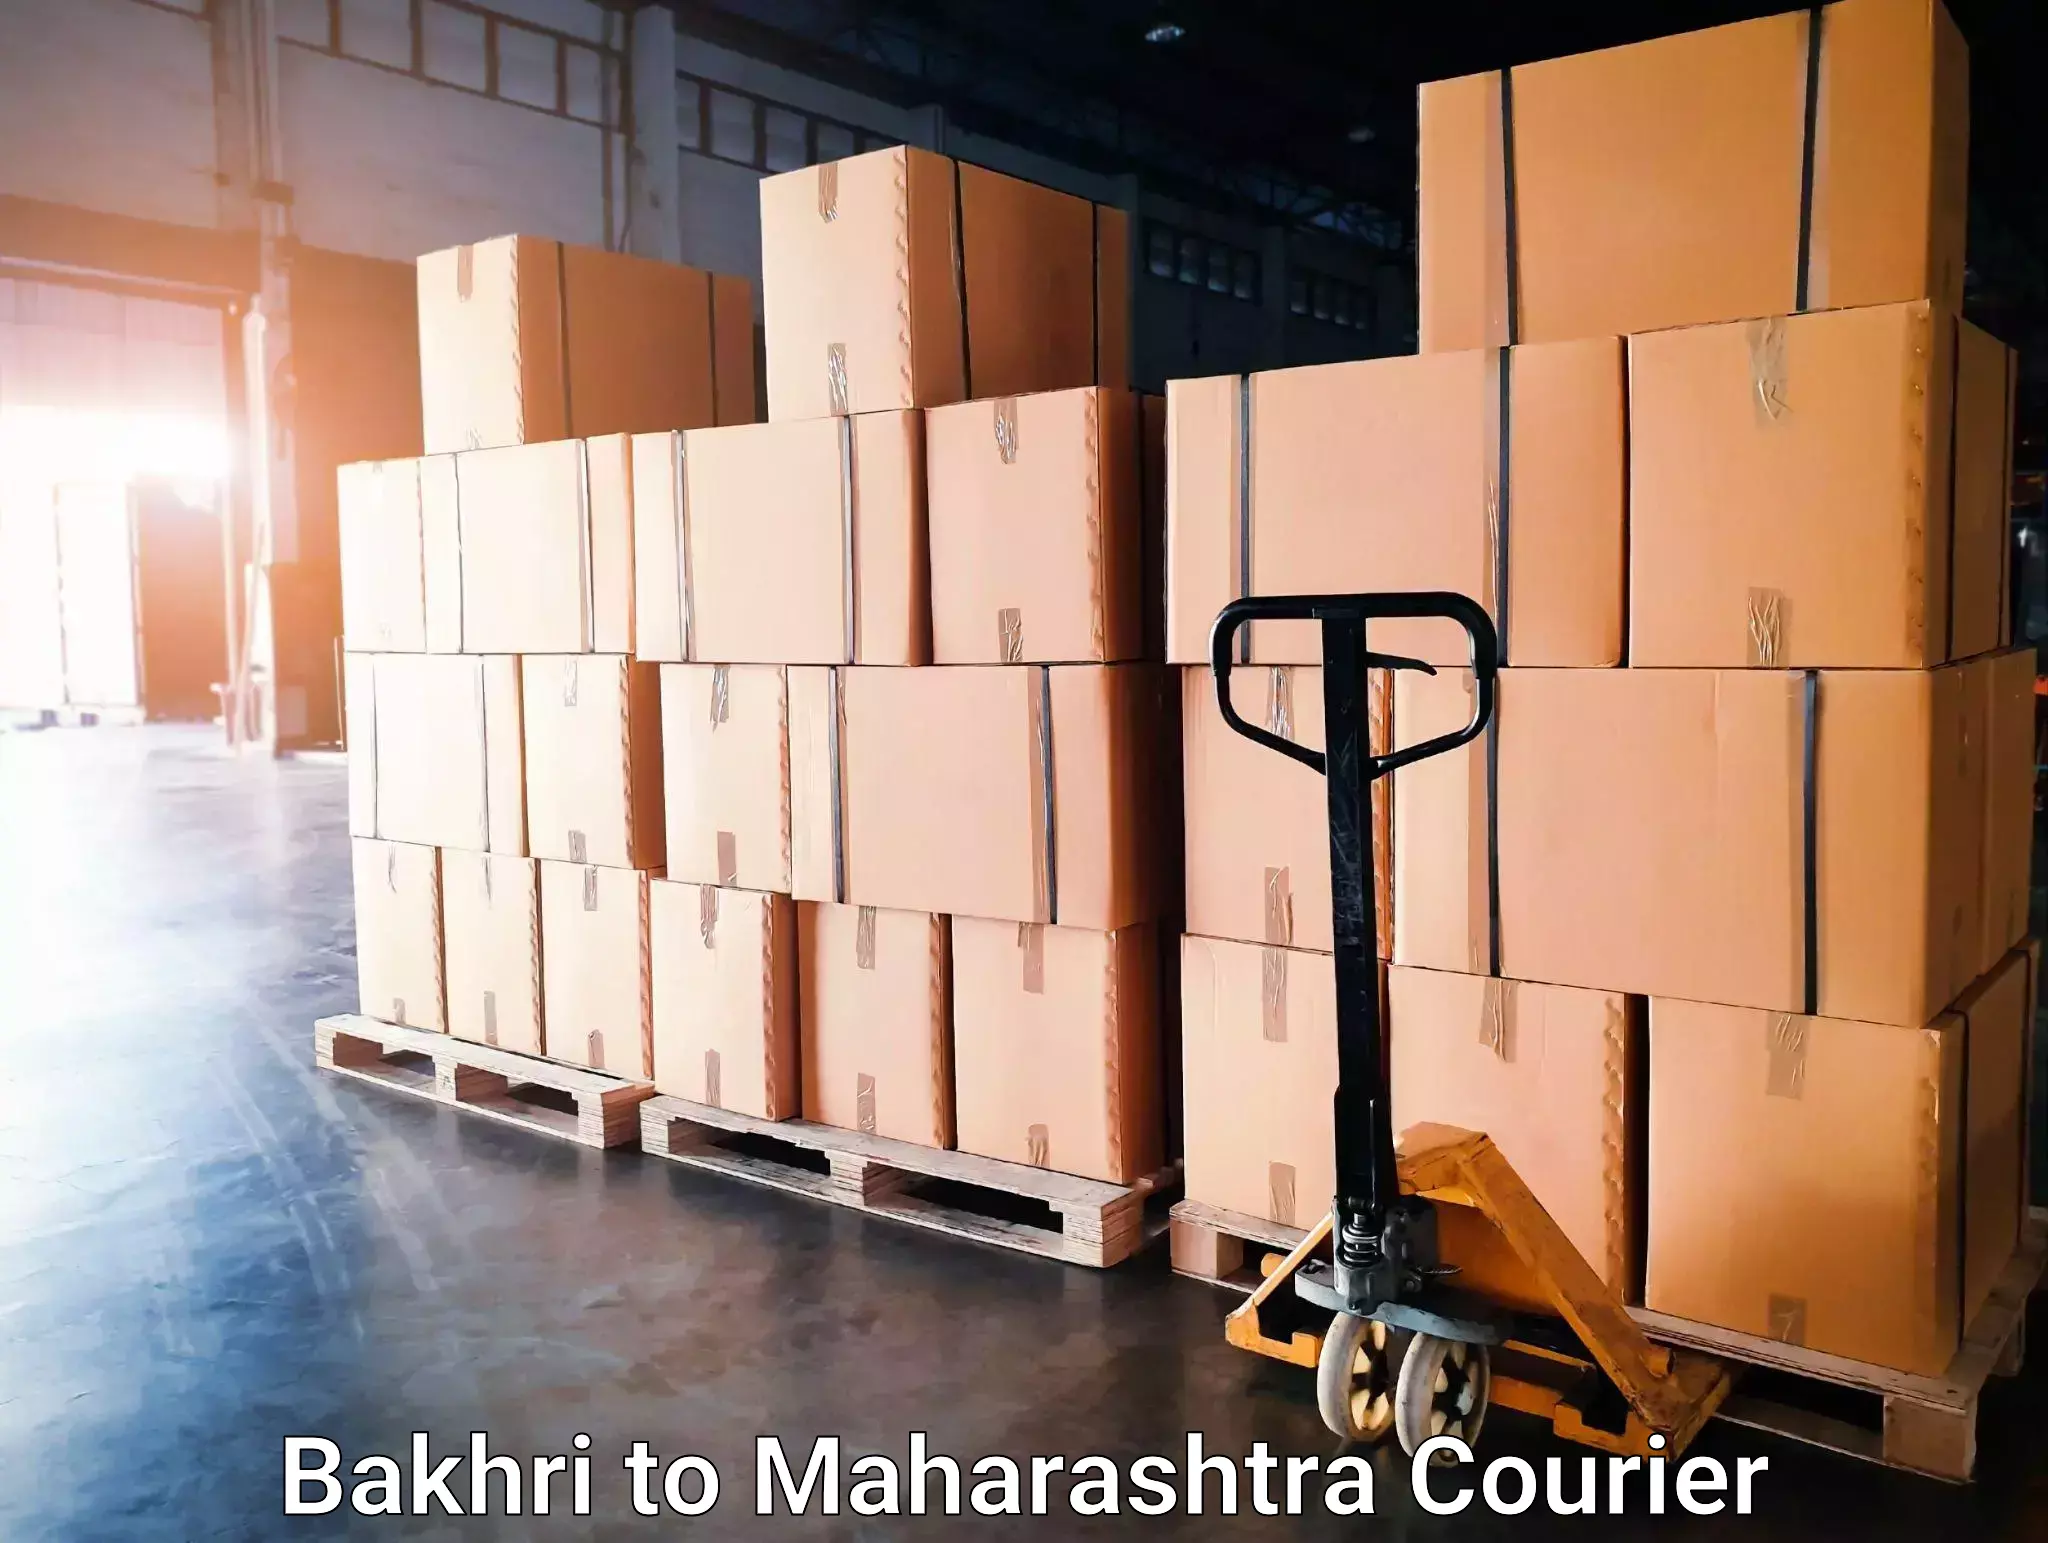 Professional relocation services in Bakhri to Dadar